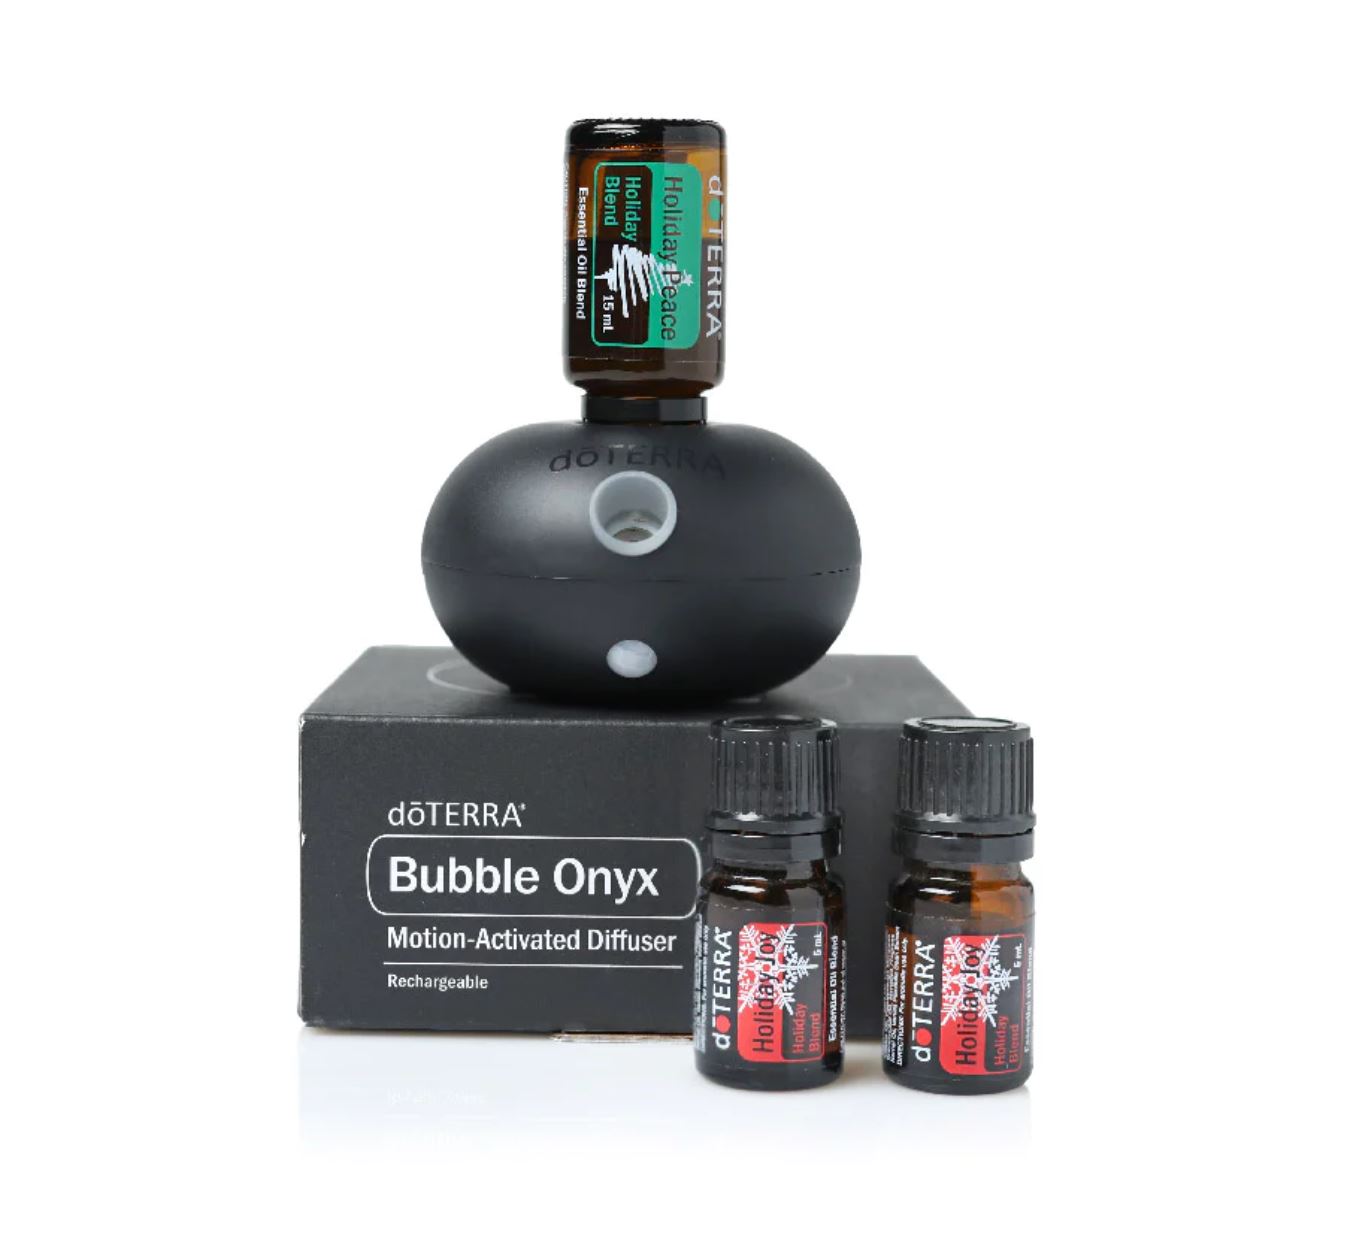 doTERRA Bubble Diffuser with essential oils